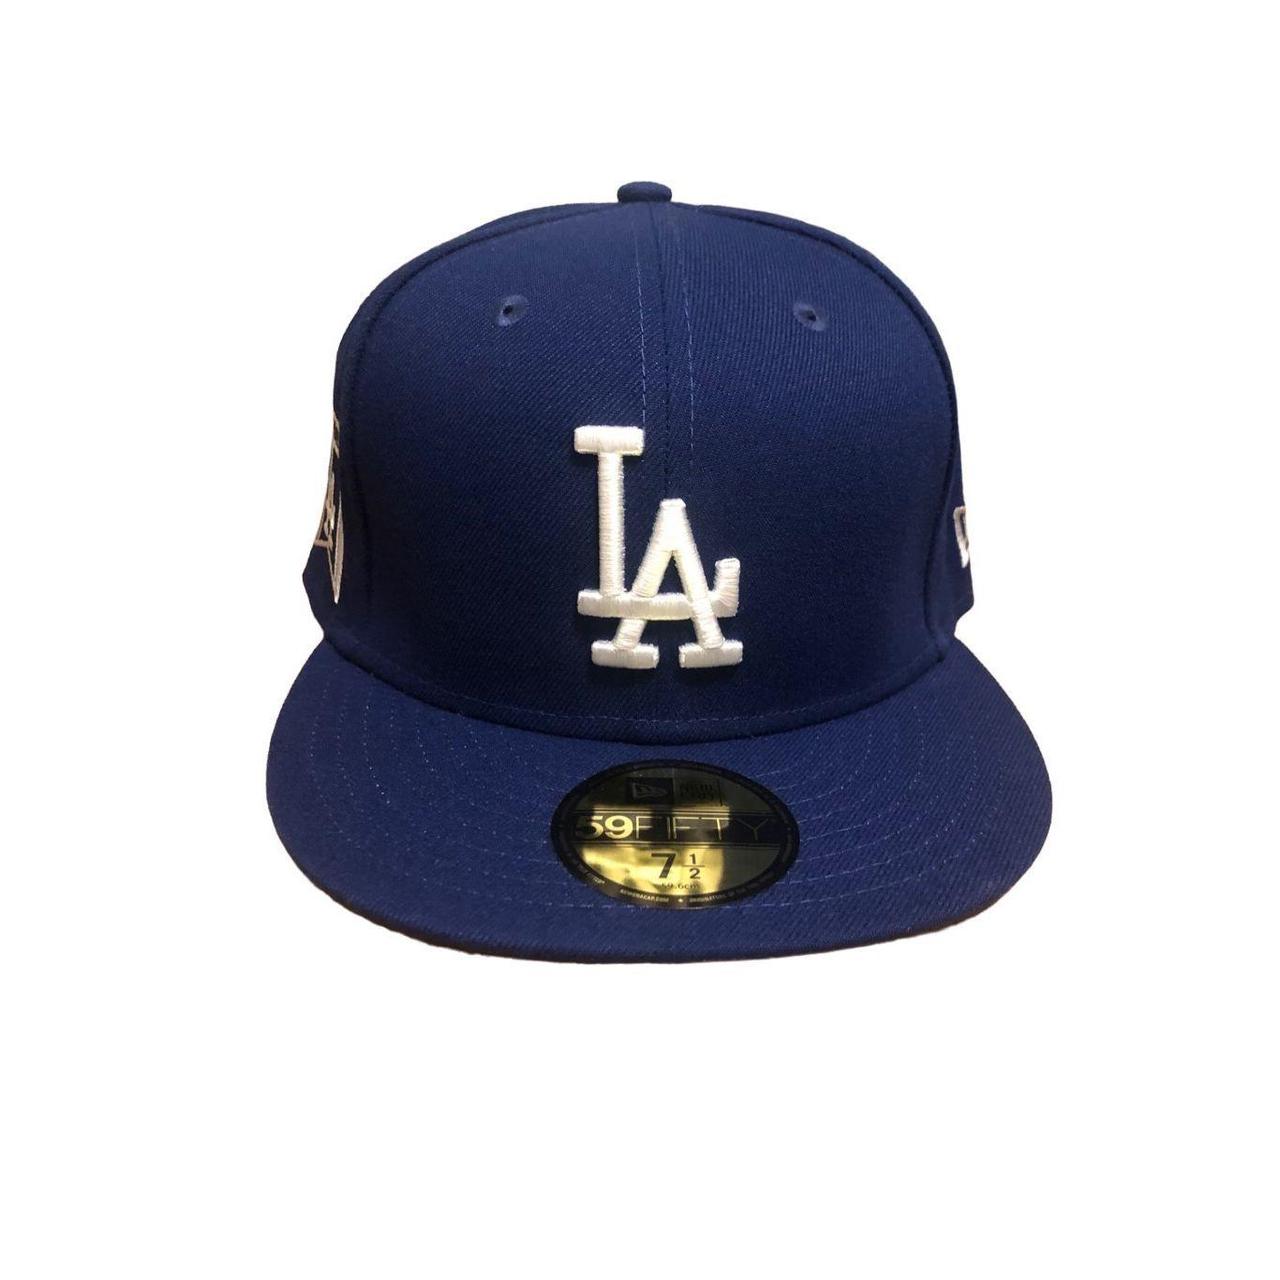 Los Angeles Dodgers Fitted New Era 59FIFTY Banner Side Blue Cap